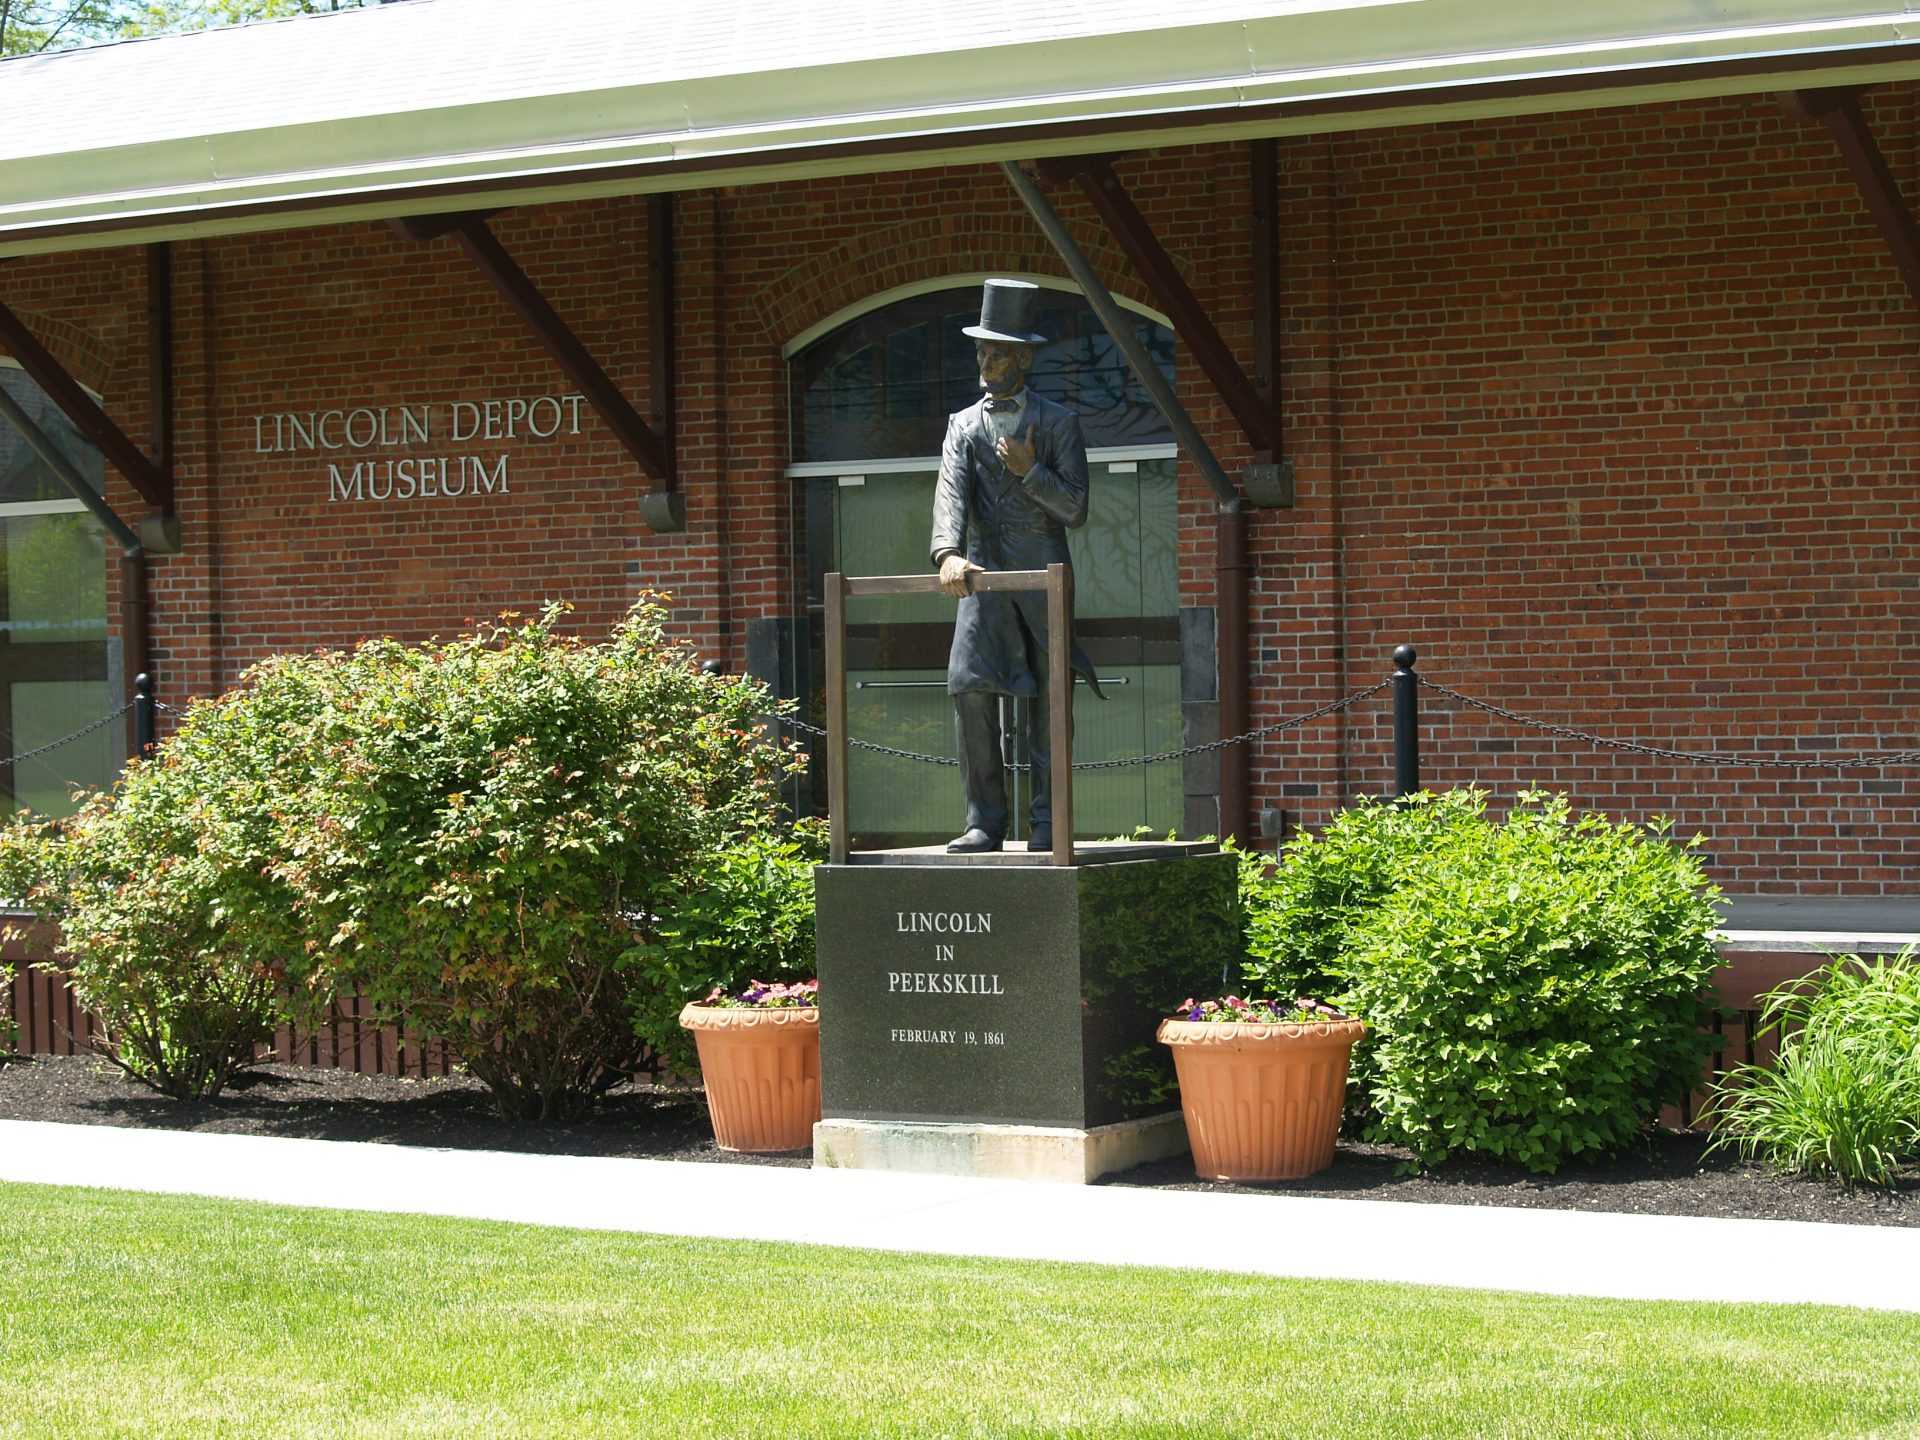 Lincoln Depot Museum Opens This Weekend With Visit From Ulysses Grant